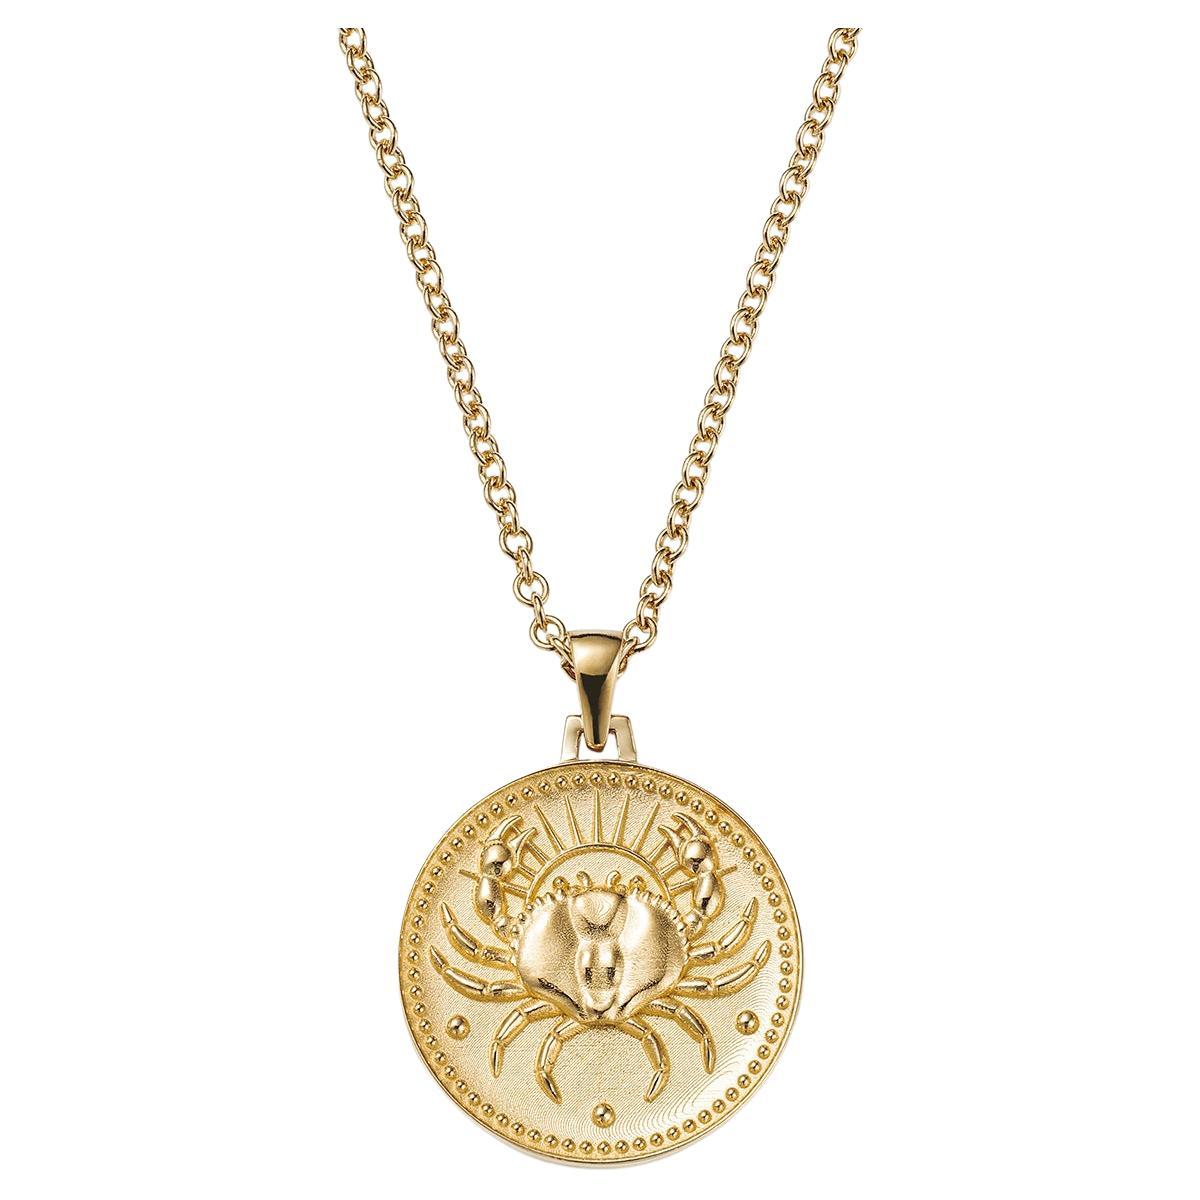 Cancer Zodiac Pendant Necklace 18kt Fairmined Ecological Gold For Sale